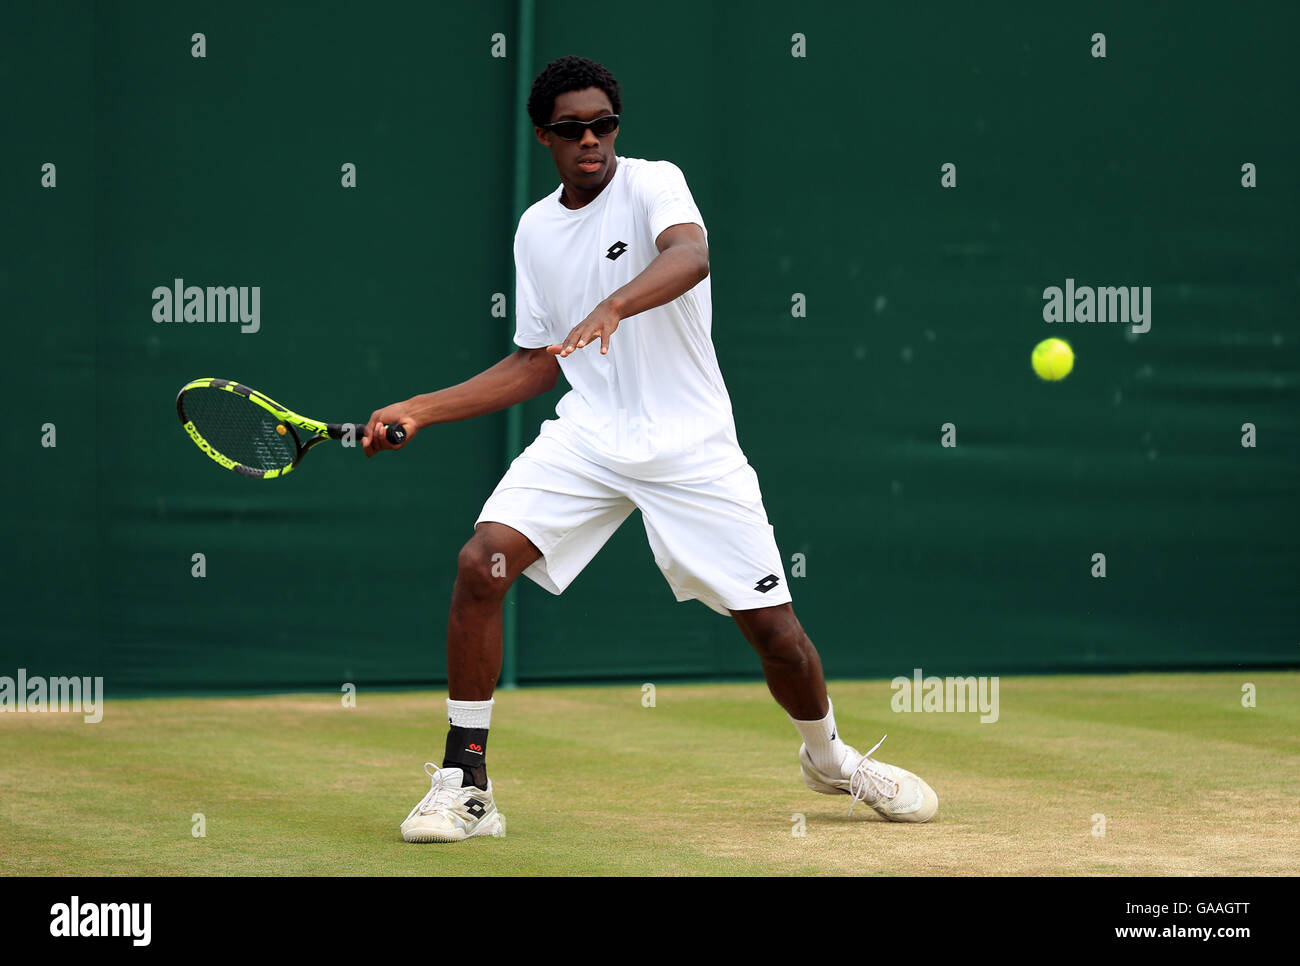 Olukayode Alafia Damina Ayeni in action in the boys singles on day seven of the Wimbledon Championships at the All England Lawn Tennis and Croquet Club, Wimbledon. Stock Photo